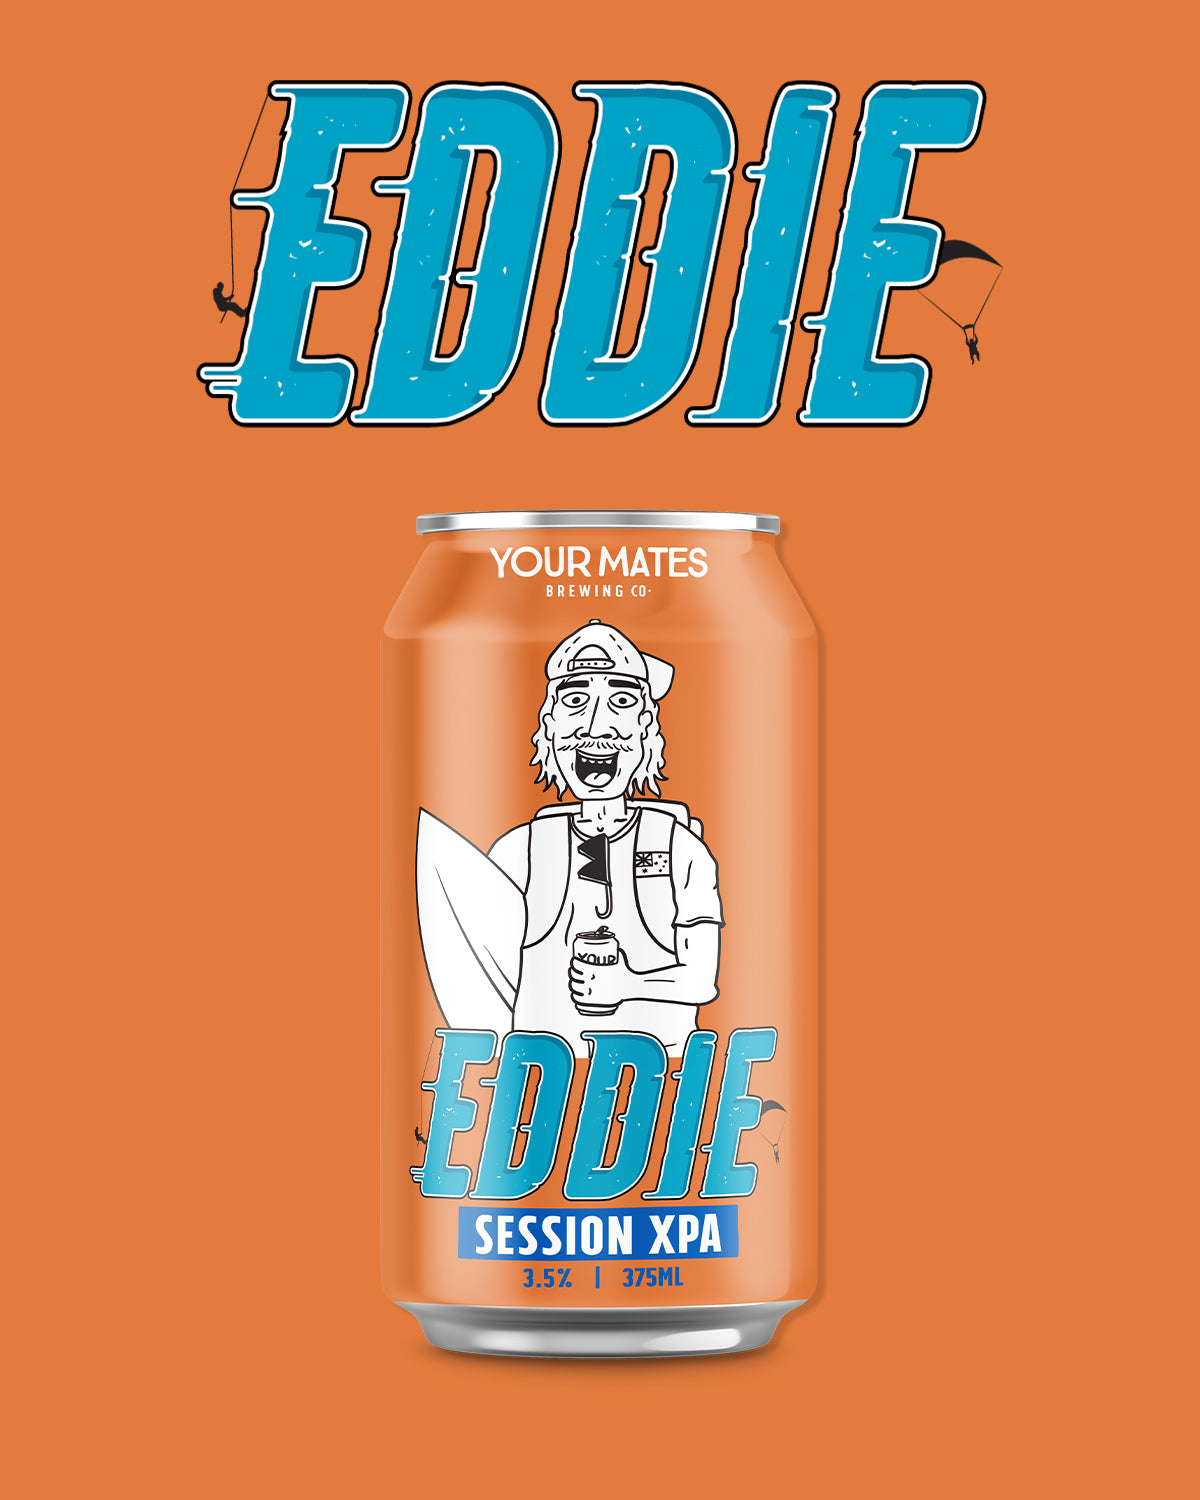 Eddie Session XPA ~ Your Mates Brewing Co